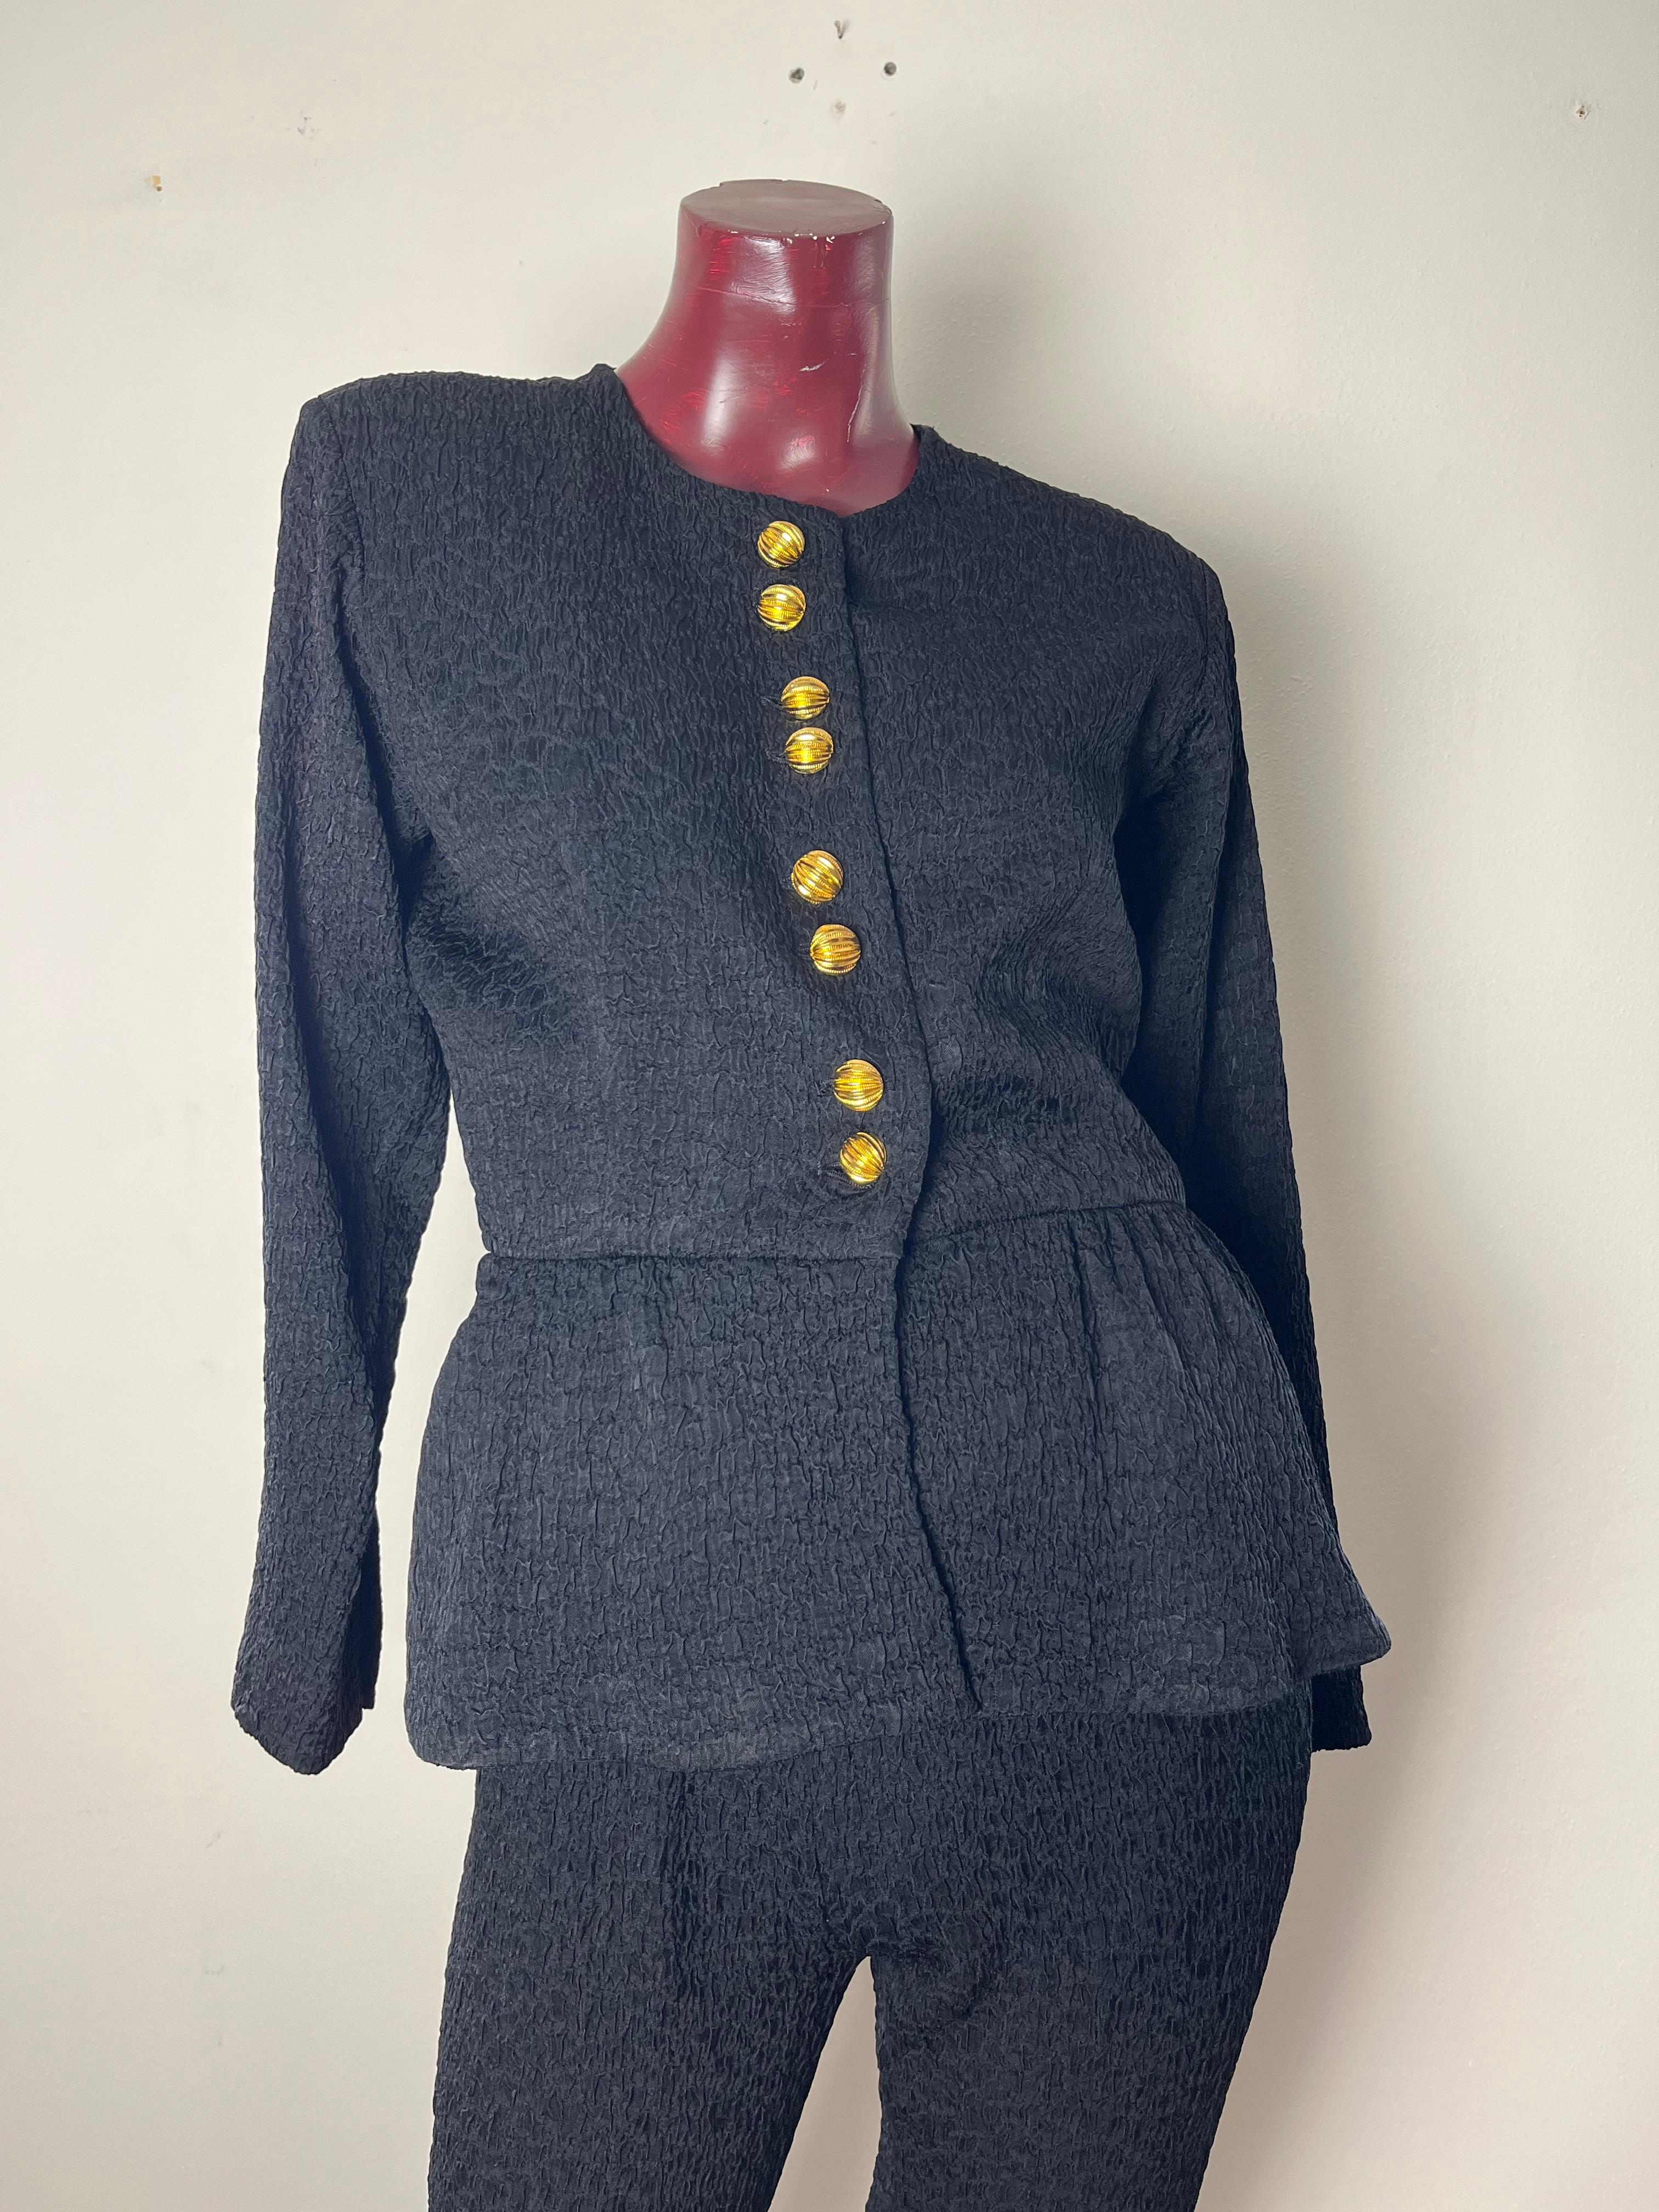 black pants ysl suit with gold buttons In Excellent Condition For Sale In Viareggio, IT